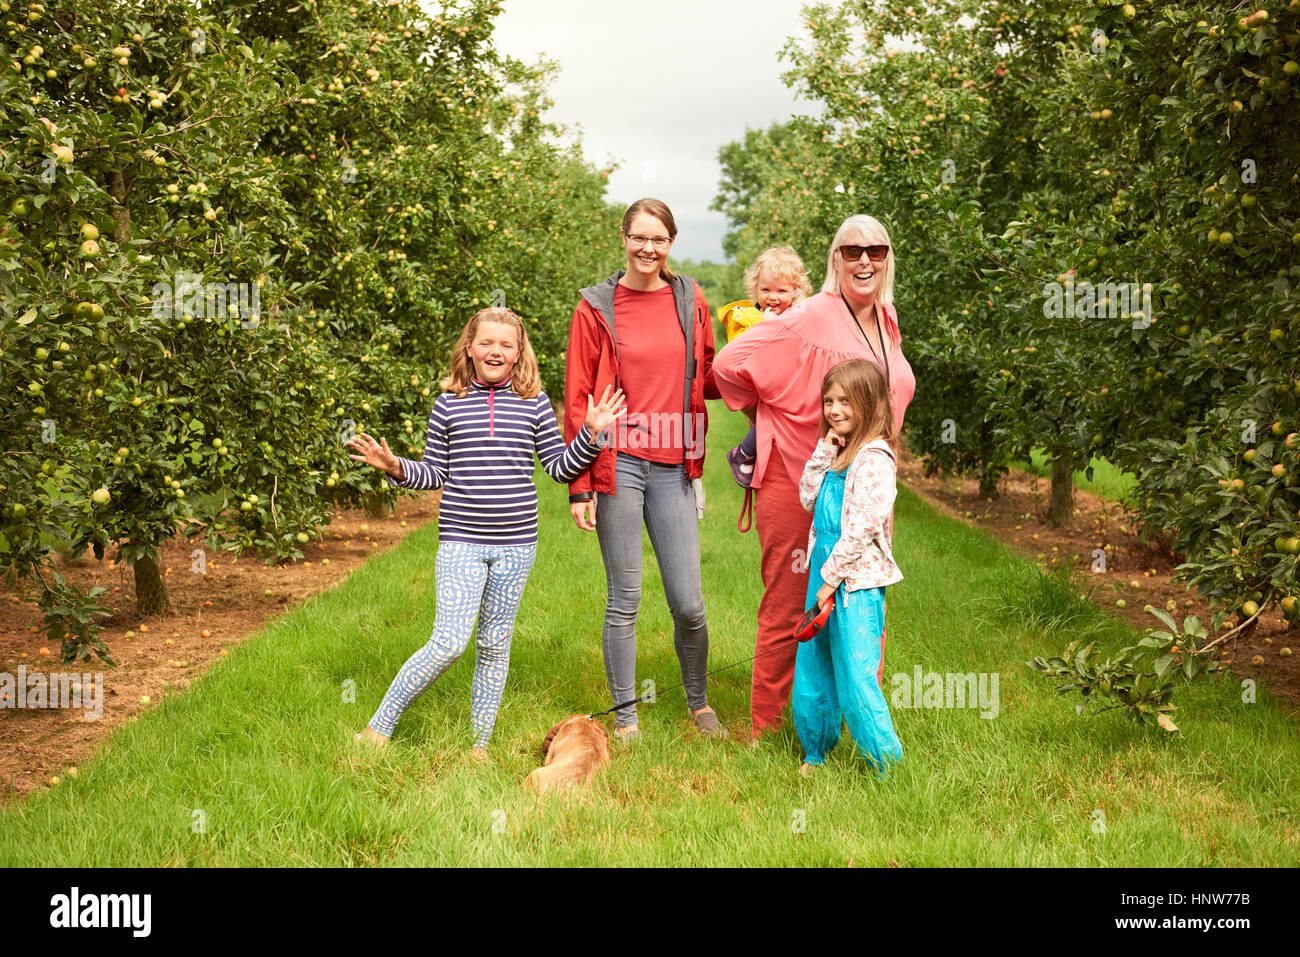 Family walking dog in apple orchard Stock Photo